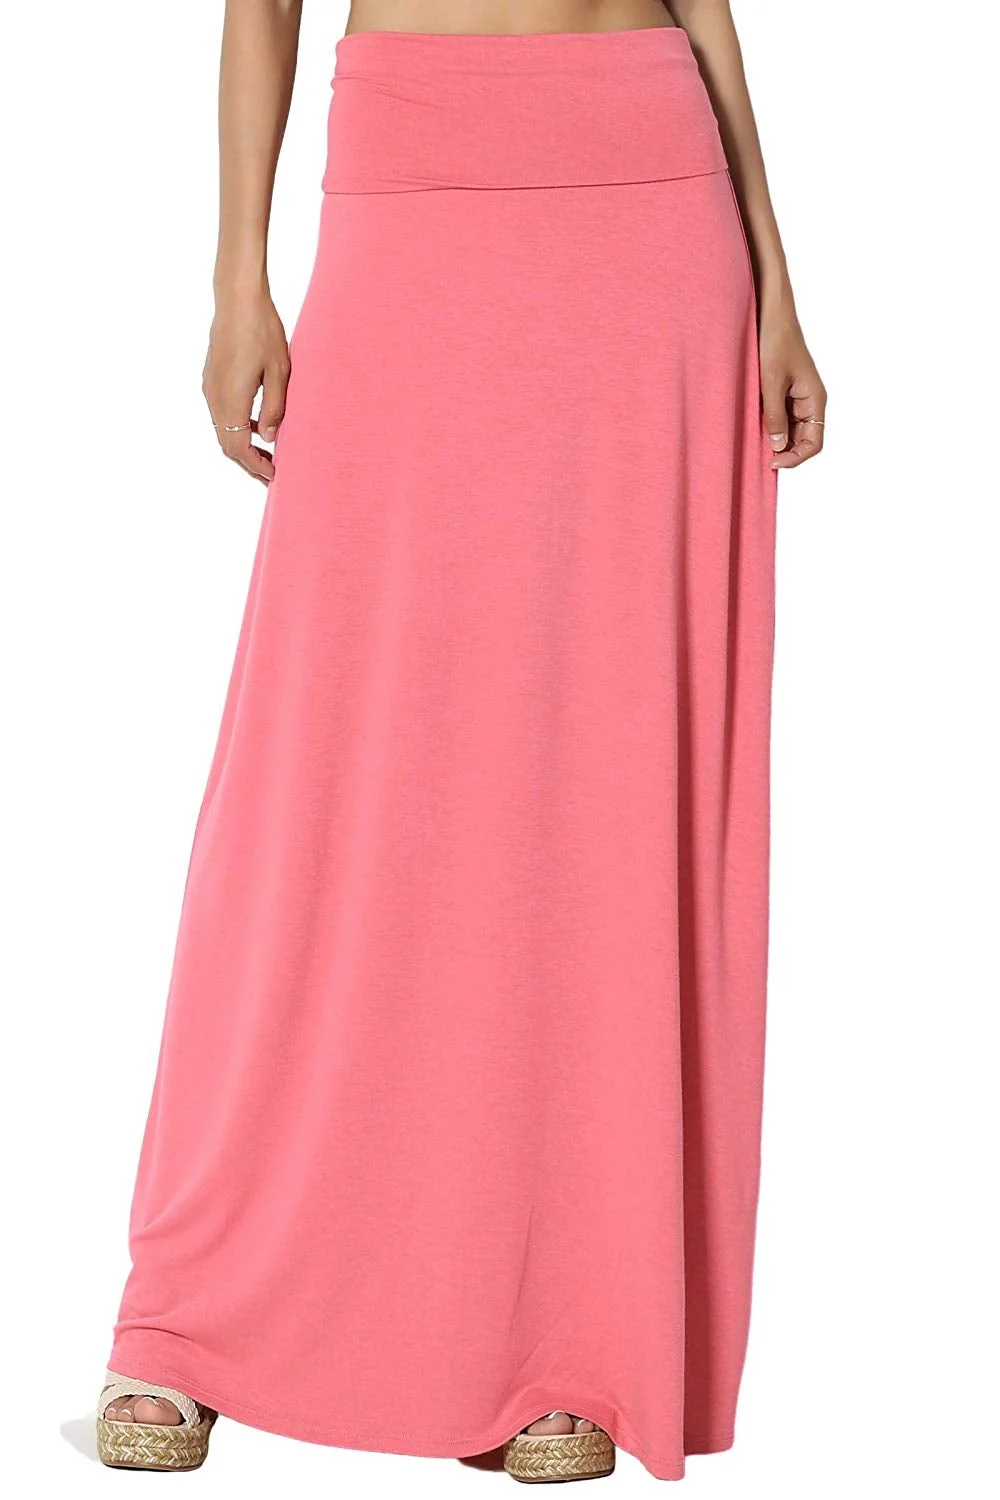 Women's Casual Lounge Solid Draped Jersey Relaxed Long Maxi Skirt